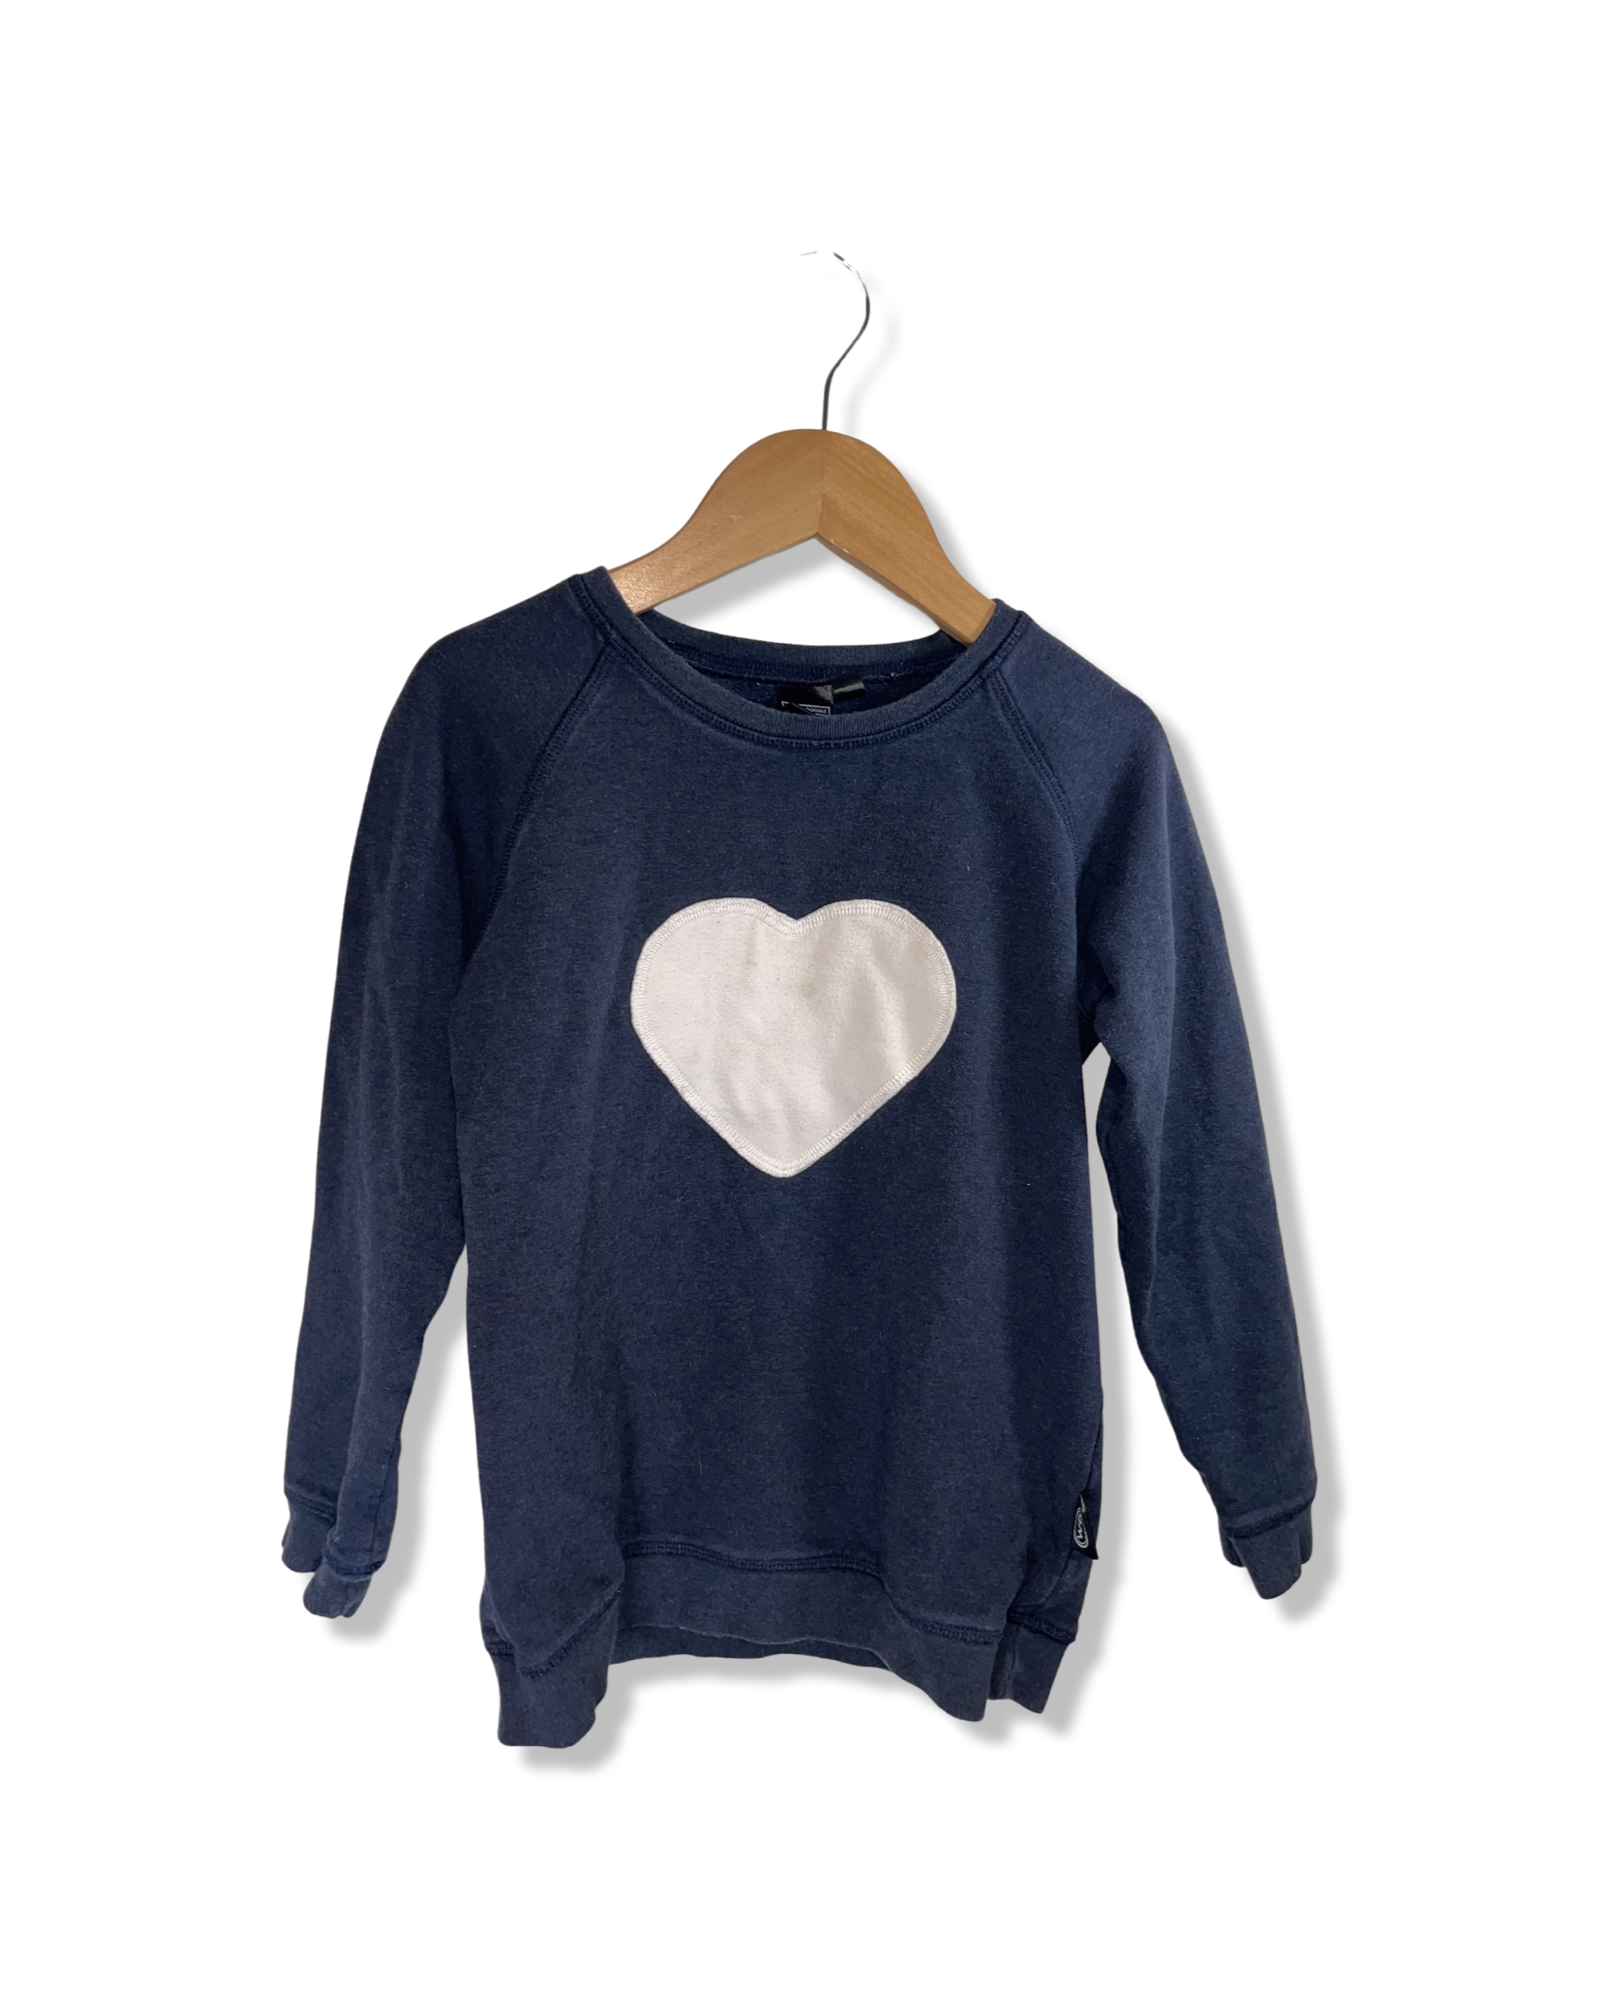 Wooly Doodle Heart Sweater (5T)